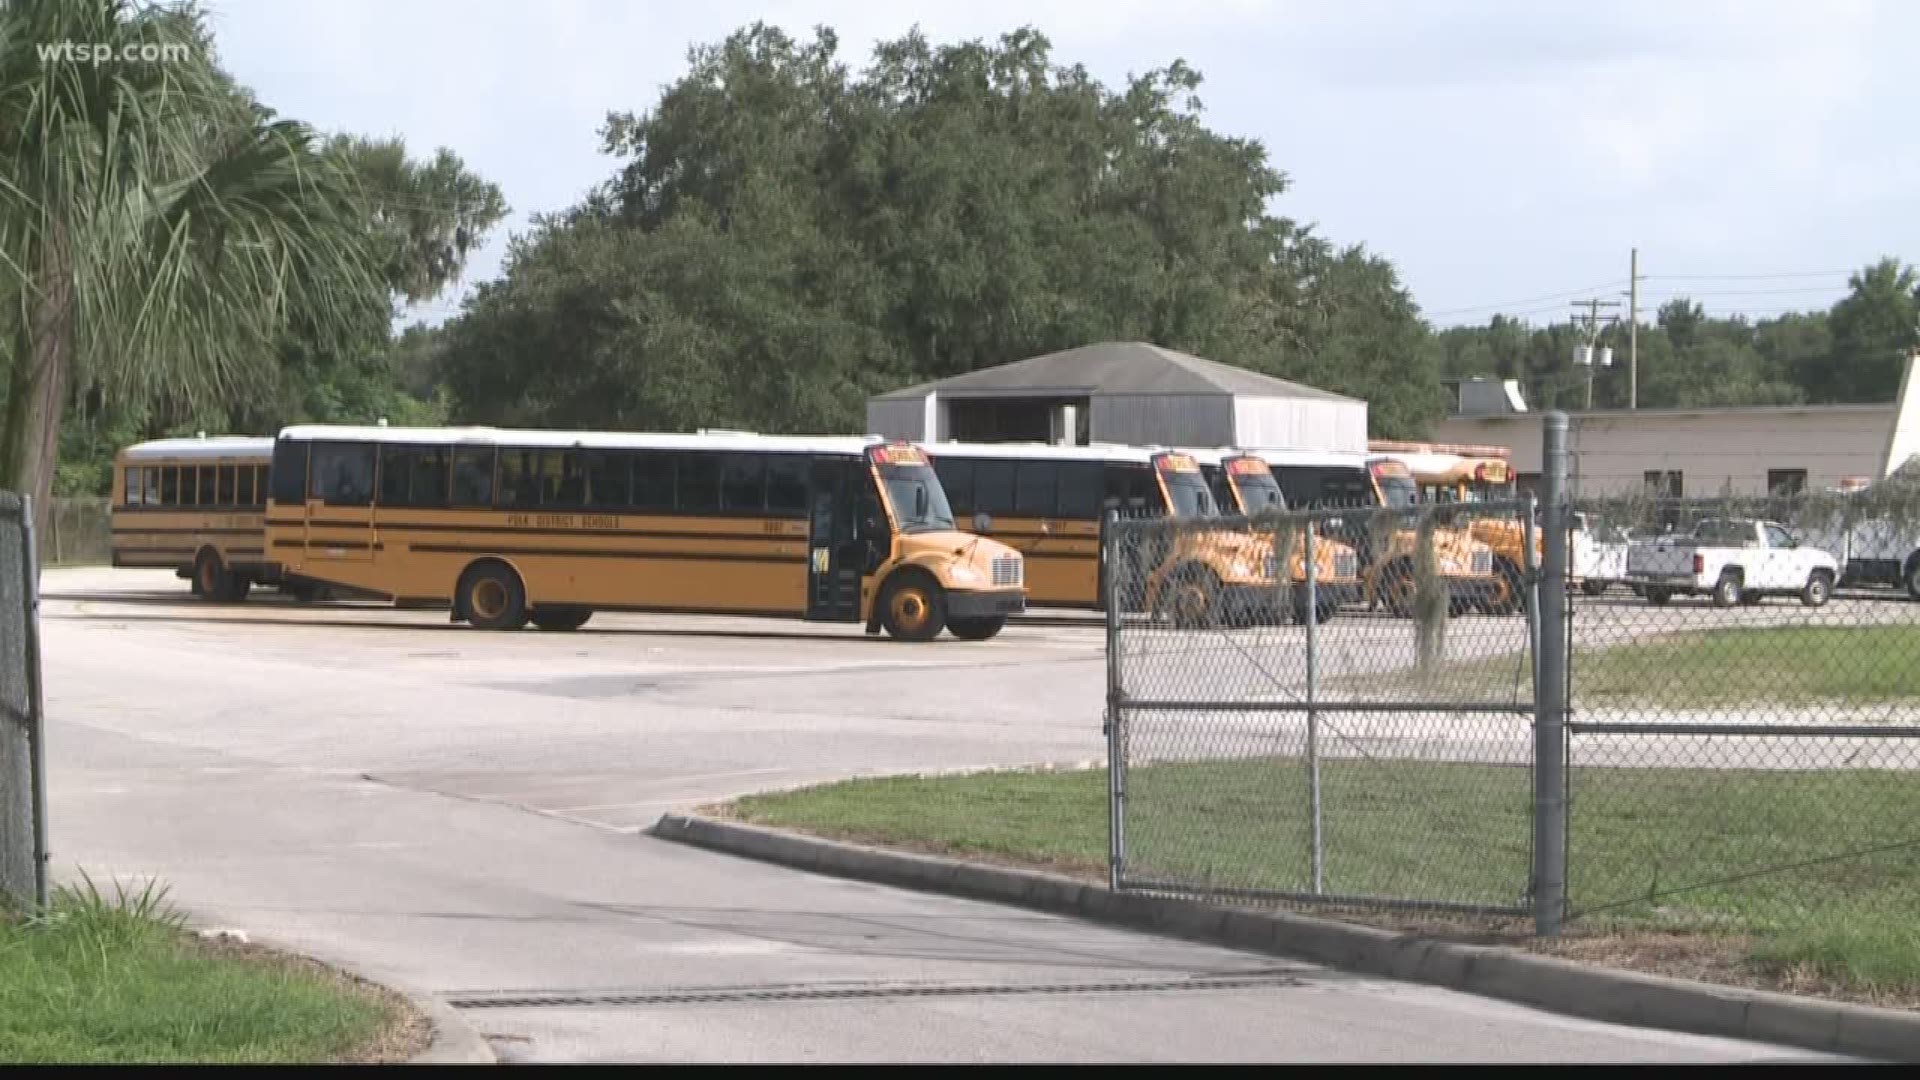 The Manatee County District will begin testing new equipment aboard school buses at three of its schools during the 2019-2020 school year. Students will use the ID cards to enter and exit a school bus. https://on.wtsp.com/2NE4C0G